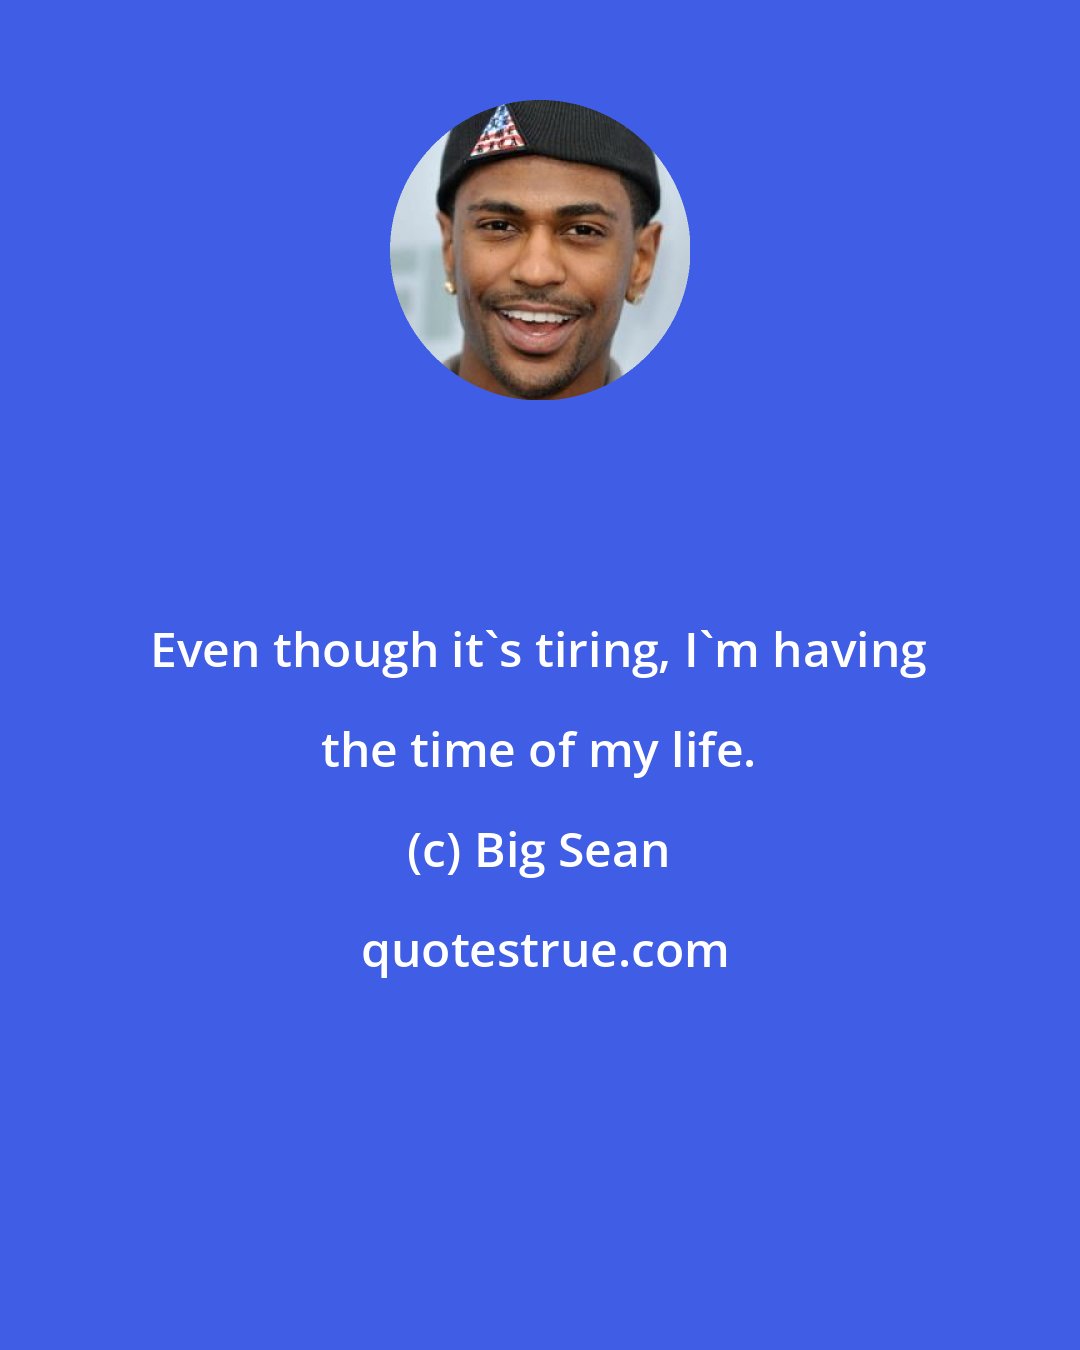 Big Sean: Even though it's tiring, I'm having the time of my life.